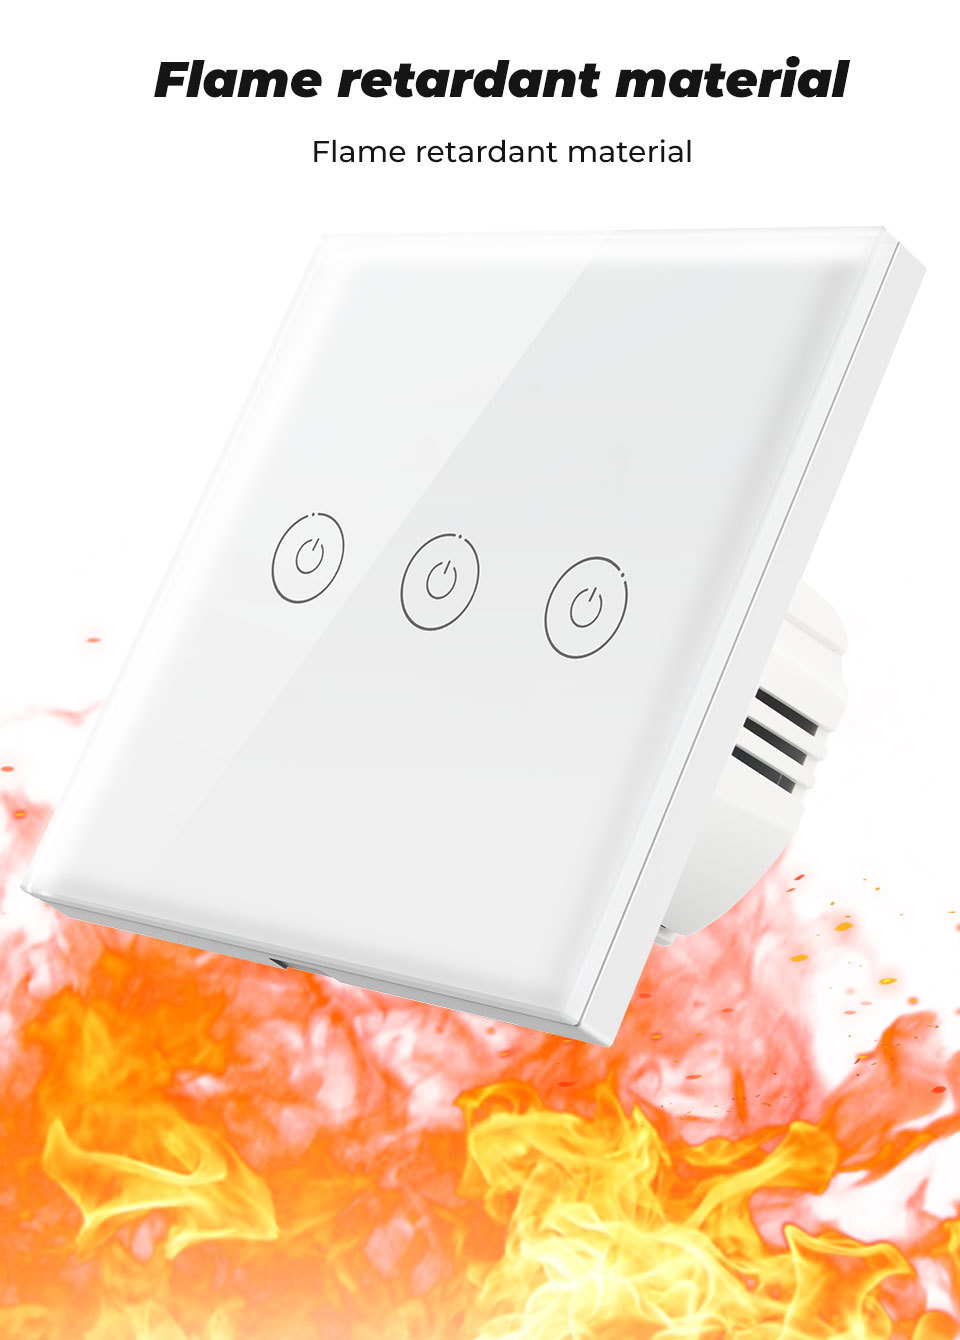 White-Touch-Tempered-Glass-European-Regulations-Smart-Light-Wall-Switch-Panel-Home-Hotel-Villa-Smart-1753923-8